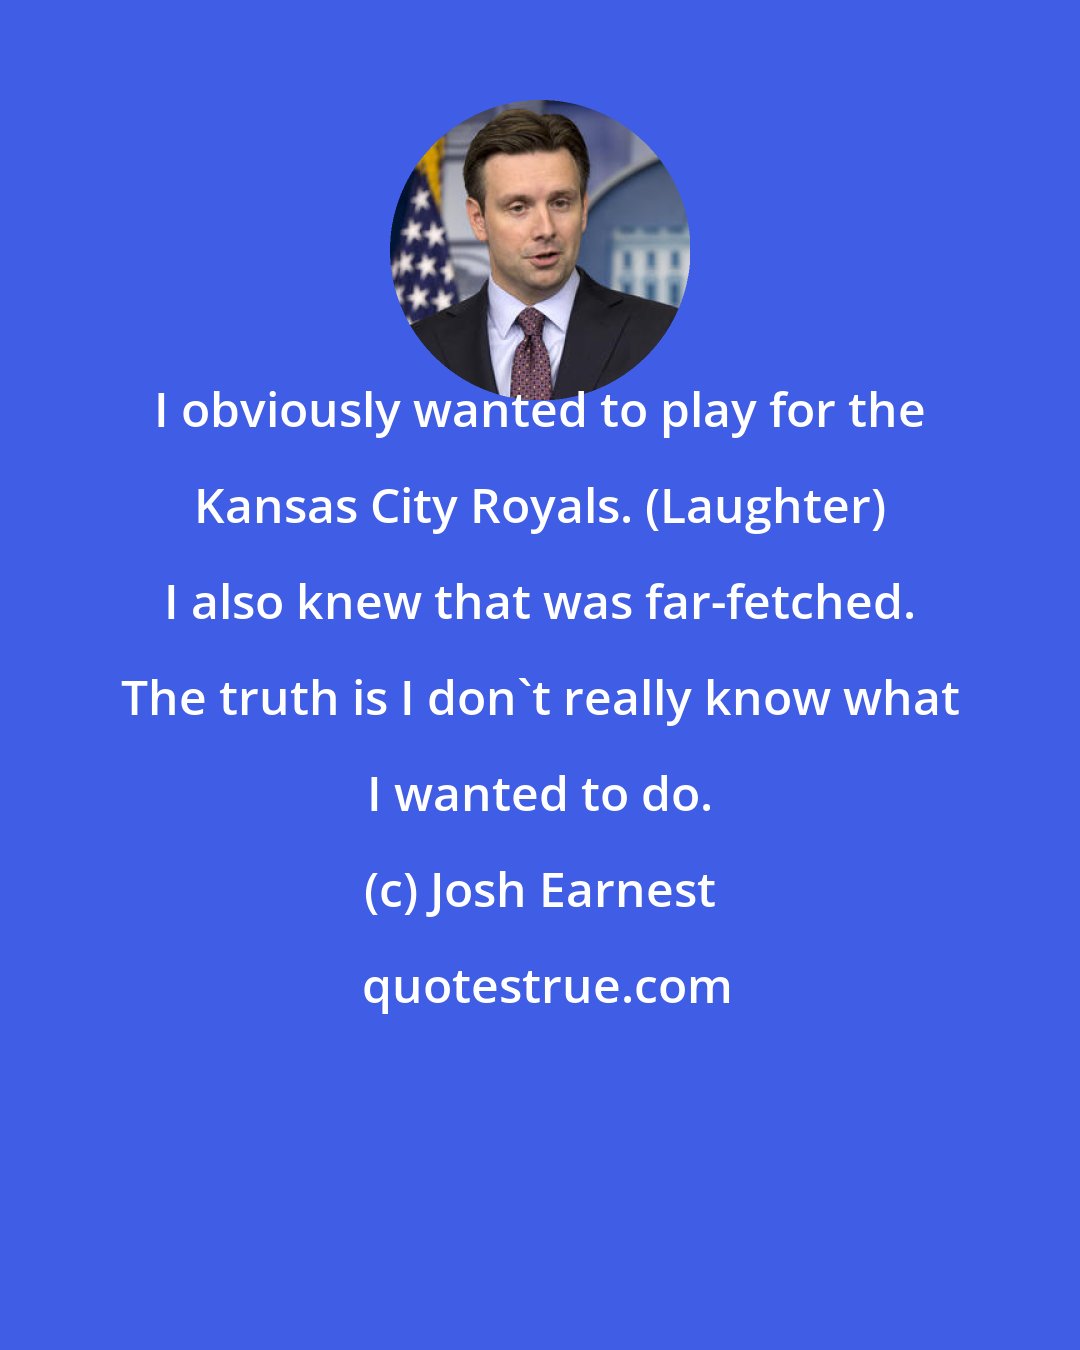 Josh Earnest: I obviously wanted to play for the Kansas City Royals. (Laughter) I also knew that was far-fetched. The truth is I don't really know what I wanted to do.